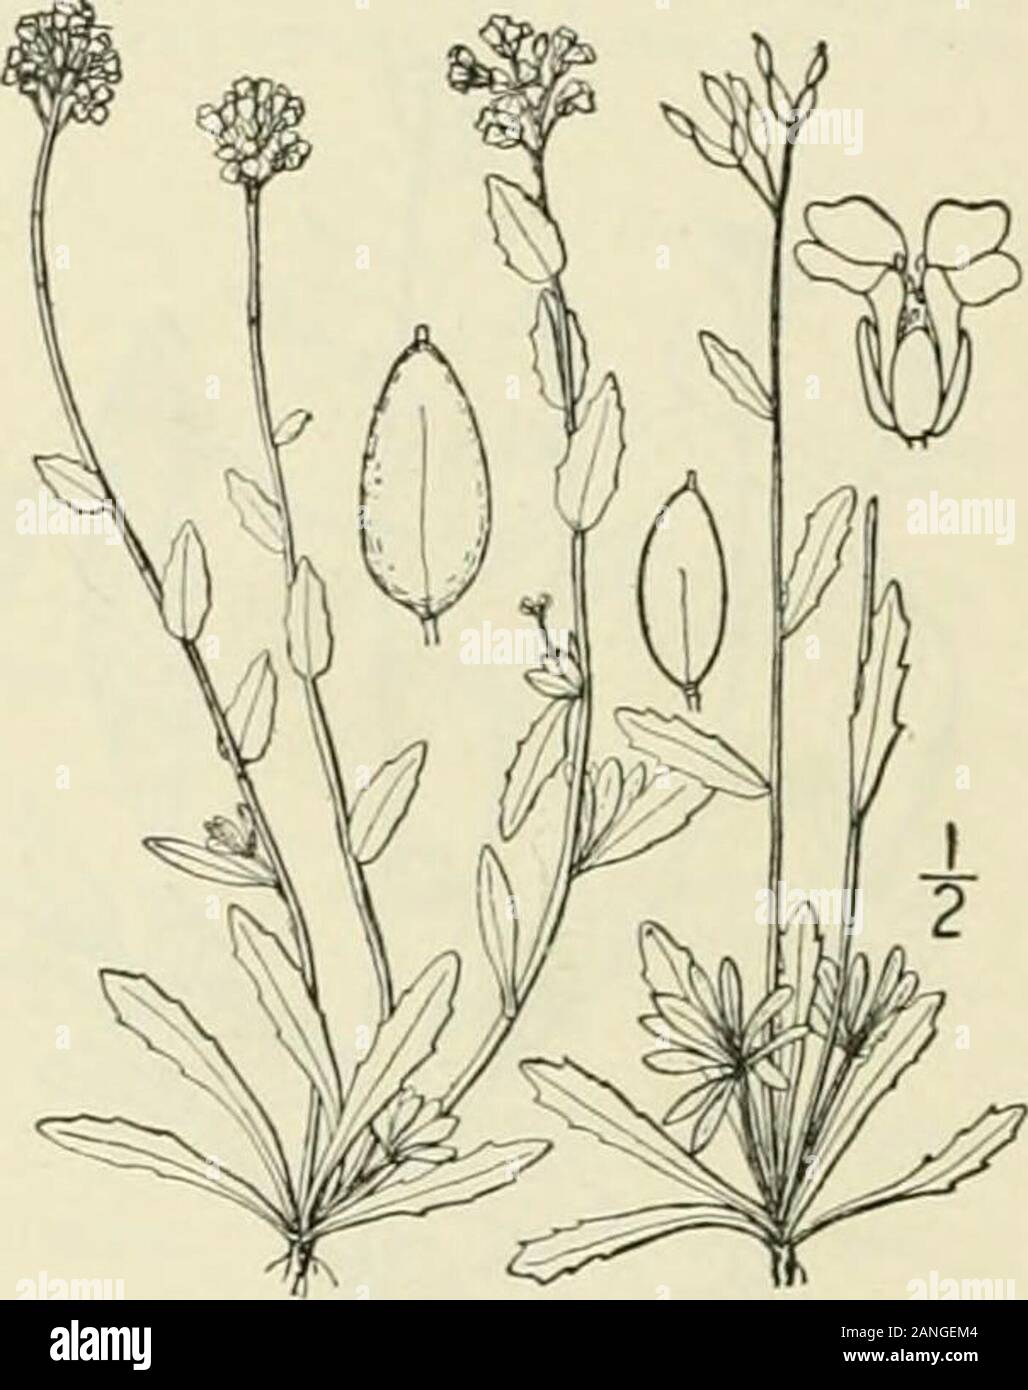 An illustrated flora of the northern United States, Canada and the British possessions : from Newfoundland to the parallel of the southern boundary of Virginia and from the Atlantic Ocean westward to the 102nd meridian; 2nd ed. . 7. Draba arabisans IMichx. Rock-cressWhitlow-grass. Fig. 2003. D. arabisans Michx. Fl. Bor. .^m. 2: 28. 1803.D. incana arabisans S. Wats. Proc. Am. Acad. 23: 260. 1888.D. arabisans orthocarpa Fernald, Rhodora 7: 66. 1905. Perennial by a slender branched caude.x, theflowering stems 6-2o high, sparingly stellate-pubescent, often numerous. Leaves thin, green,loosely and Stock Photo